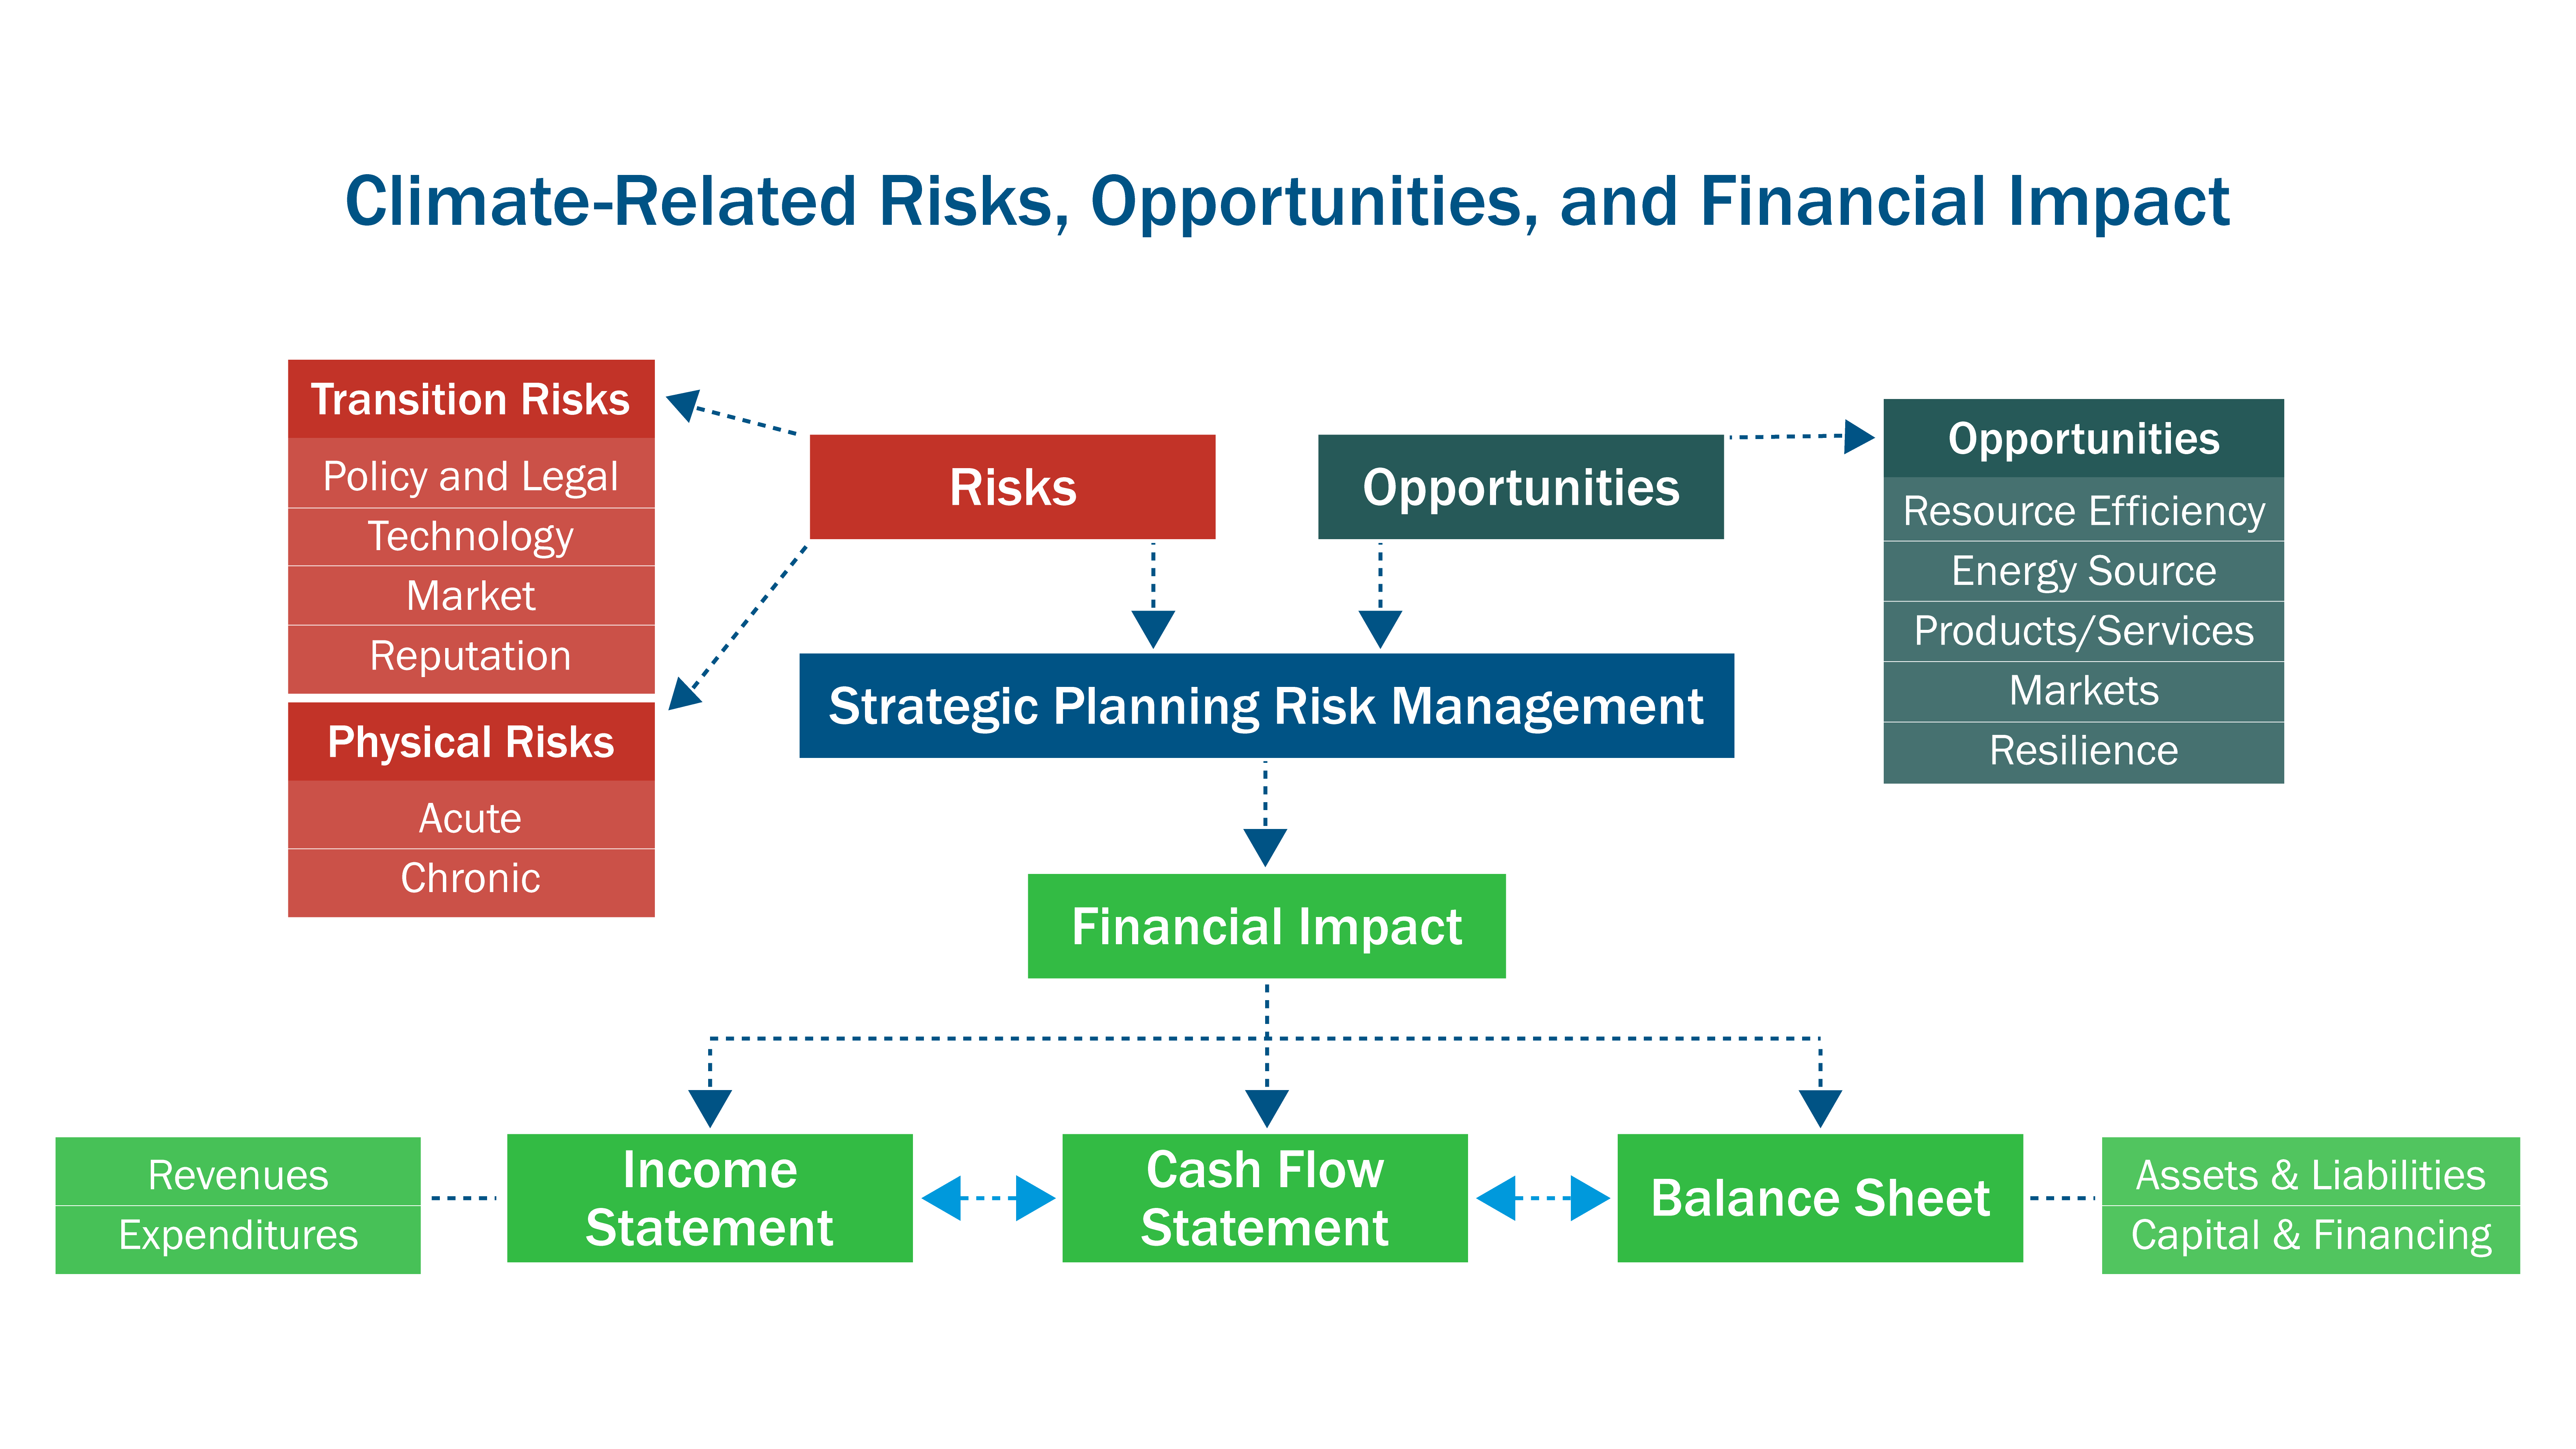 Chart describing climate-related risks, opportunities and financial impact